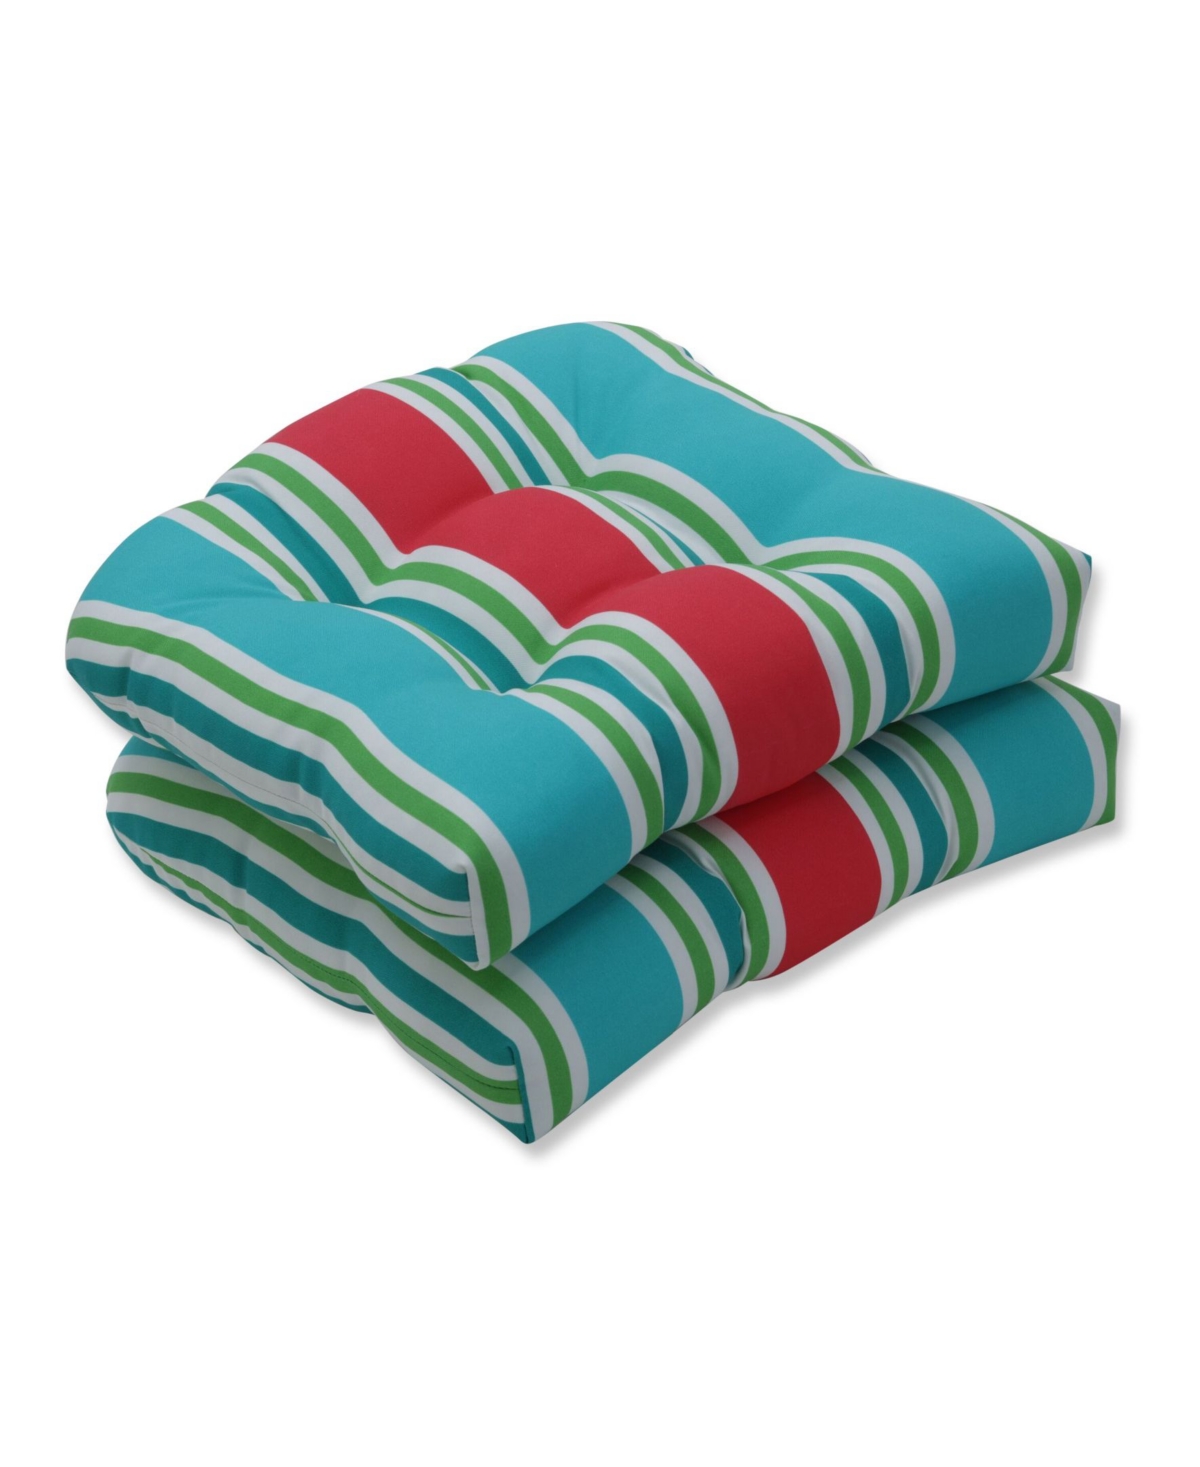 Printed 19" x 19" Tufted Outdoor Chair Pad Seat Cushion 2-Pack - Red Stripe